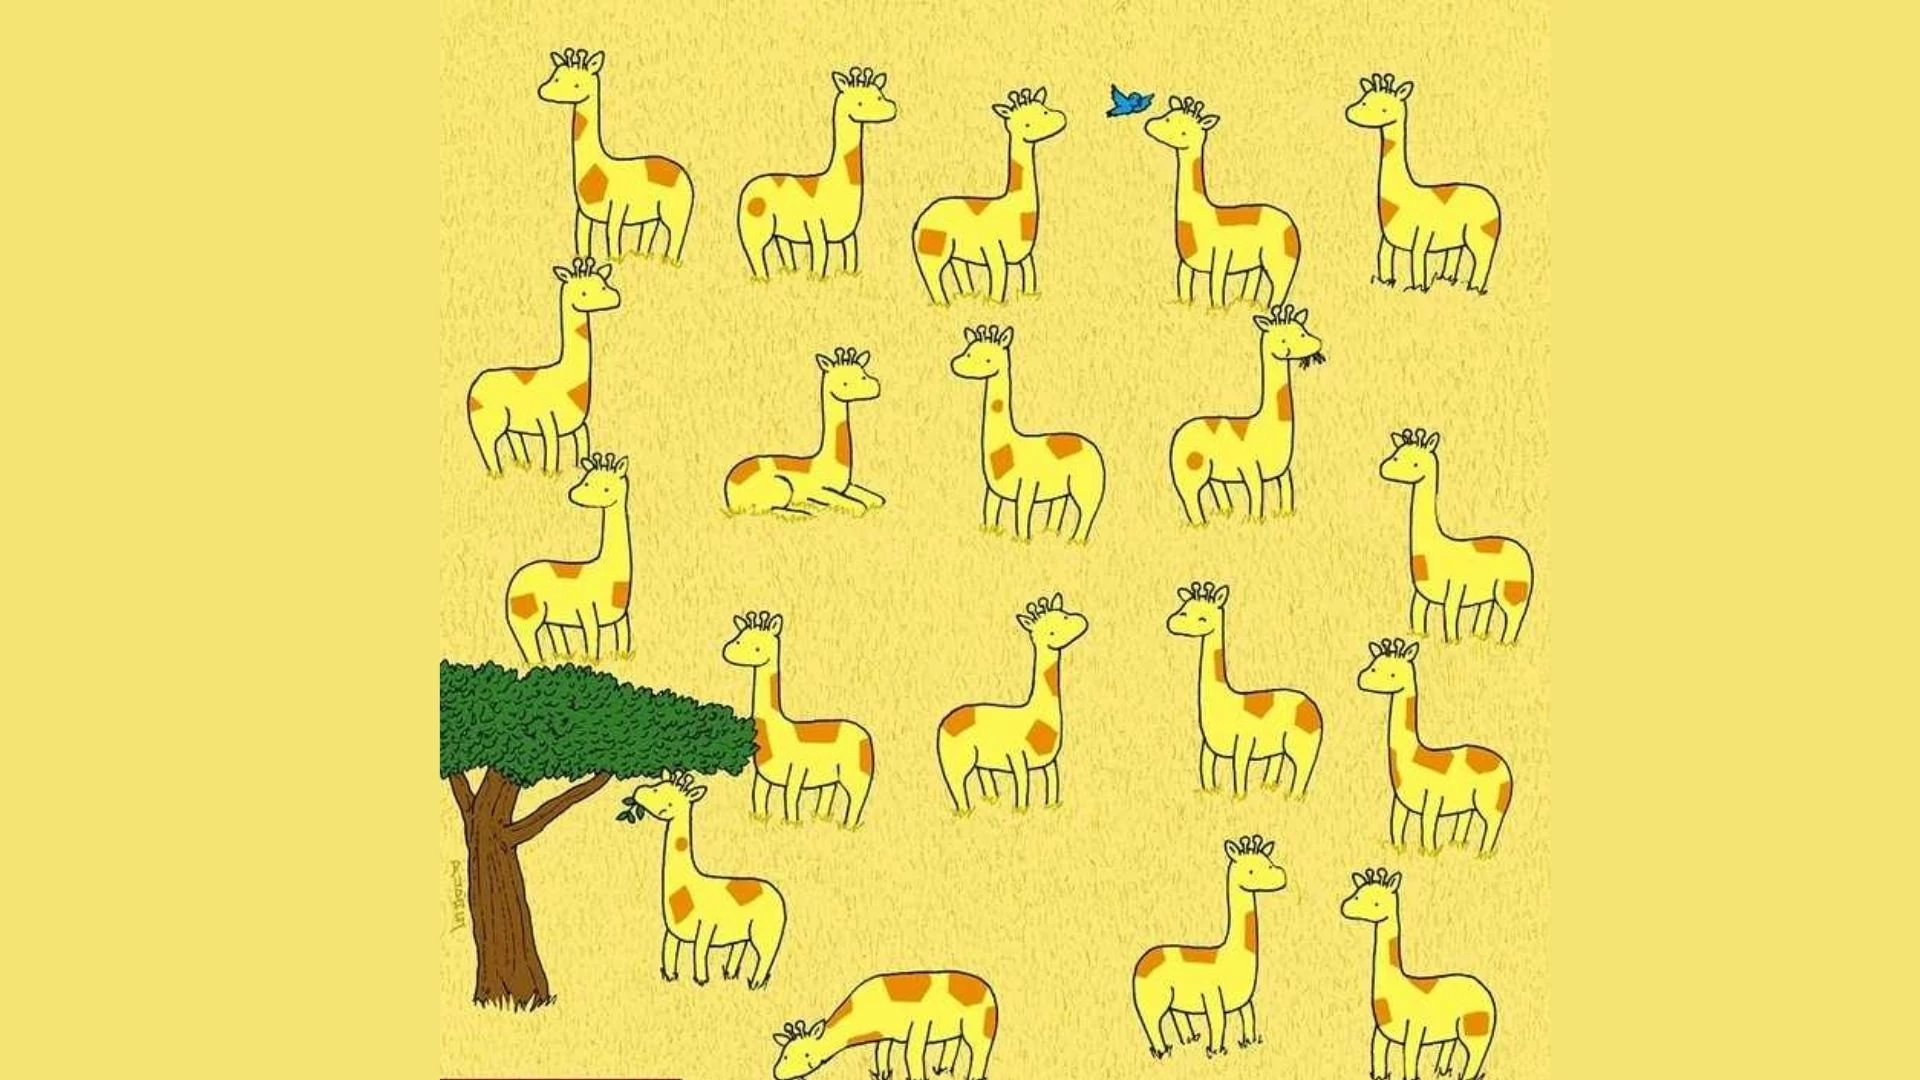 If You Have Sharp Eyes Spot the Giraffe With No Pair in Picture within 12 secs?